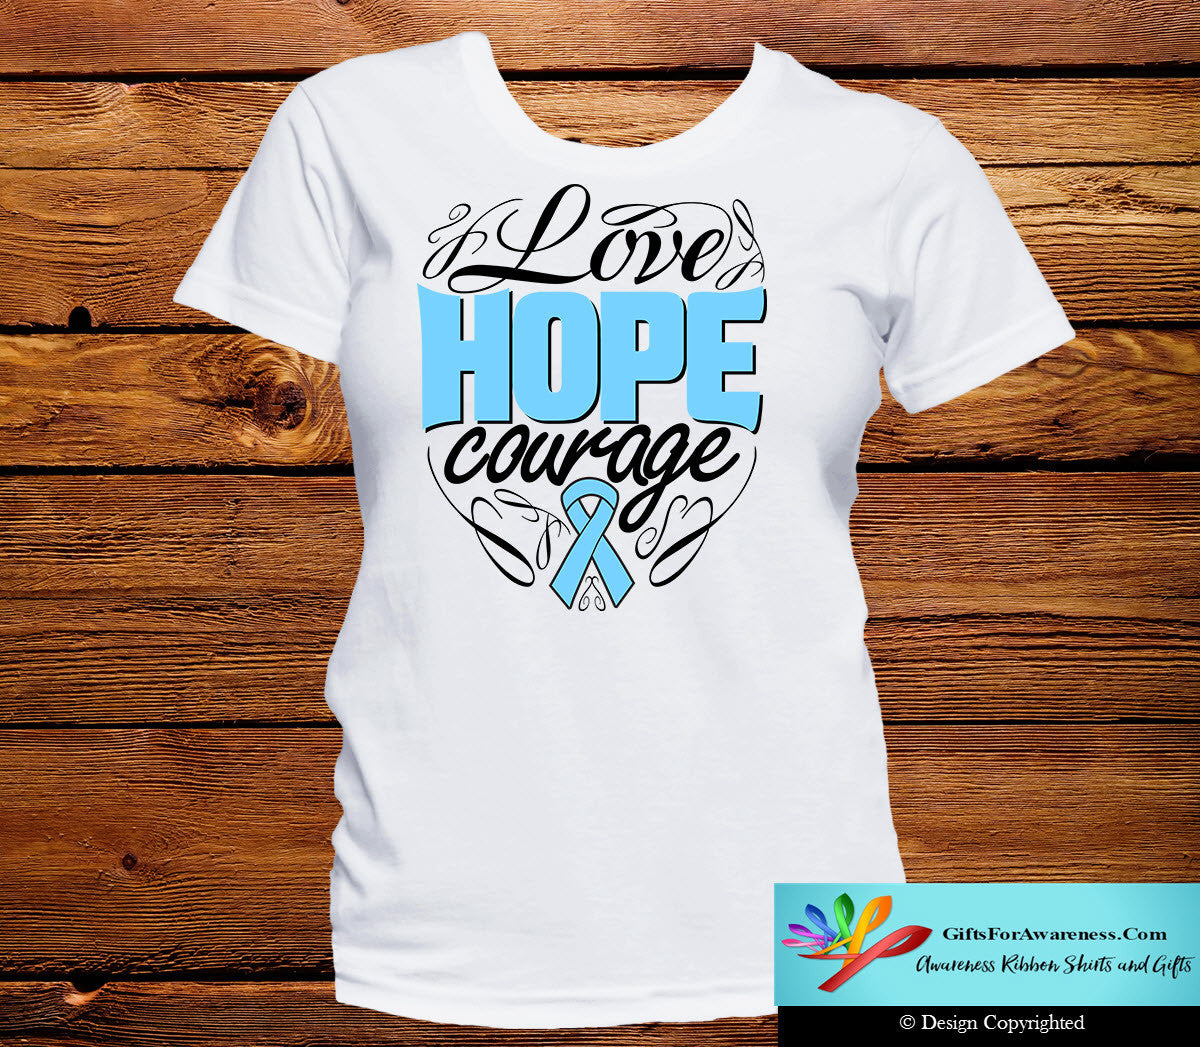 Prostate Cancer Love Hope Courage Shirts - GiftsForAwareness